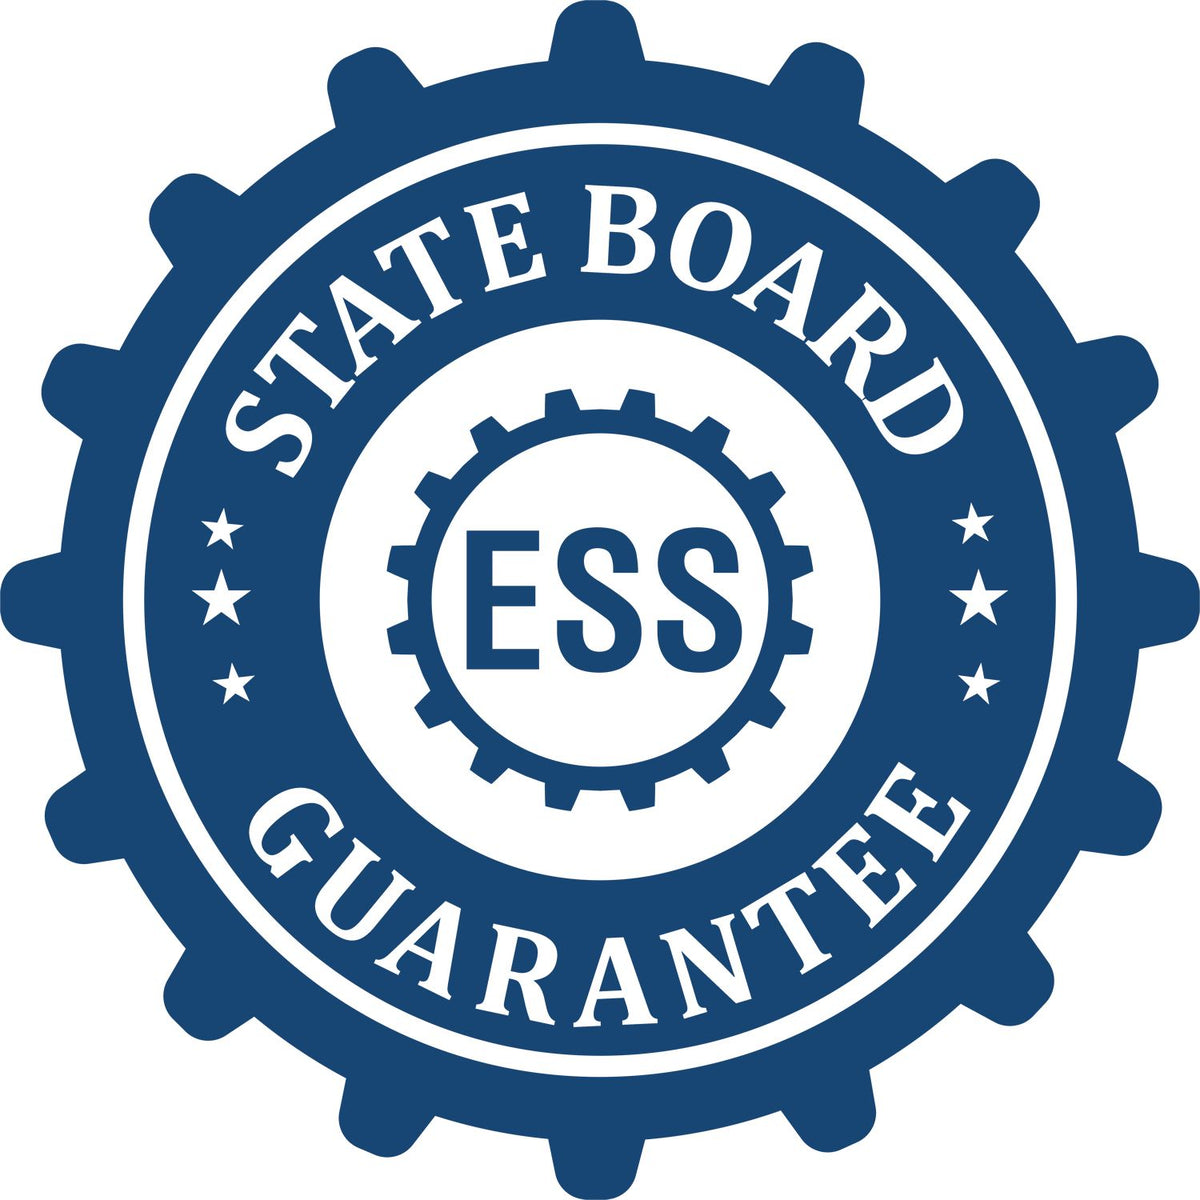 An emblem in a gear shape illustrating a state board guarantee for the Hybrid New York Land Surveyor Seal